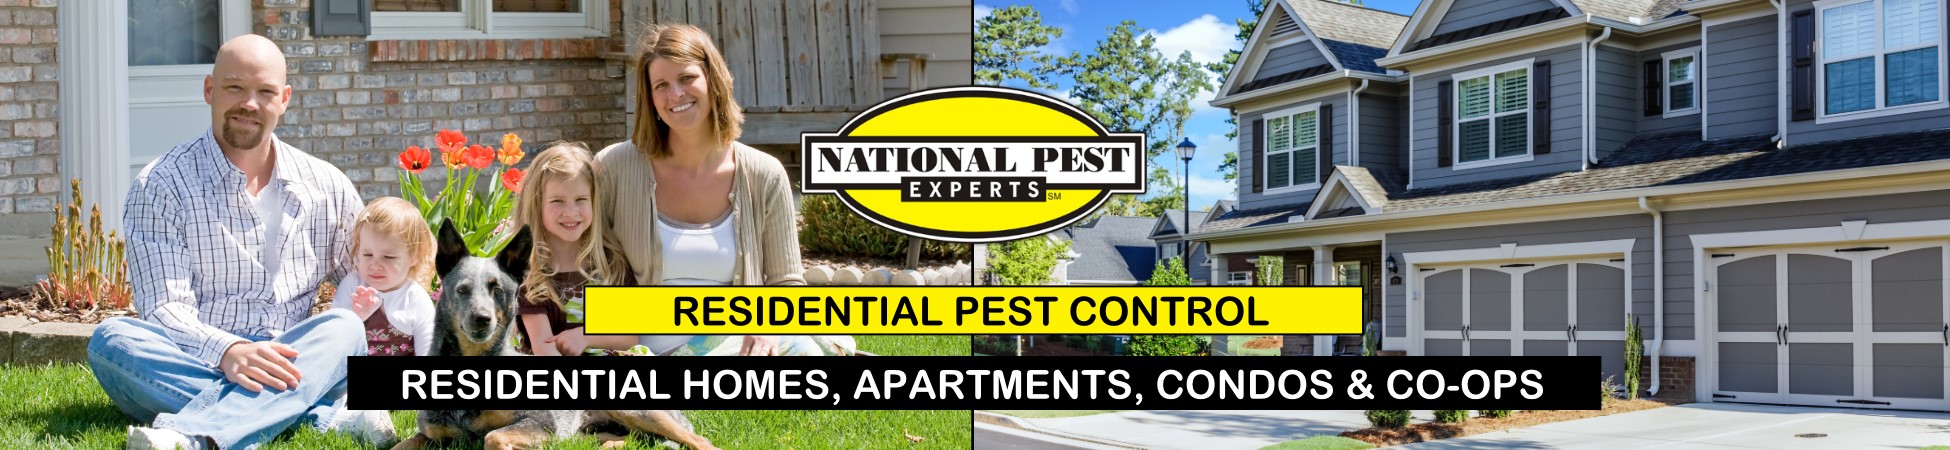 National Pest Experts - Residential exterminating and pest control in Farmingdale, NY